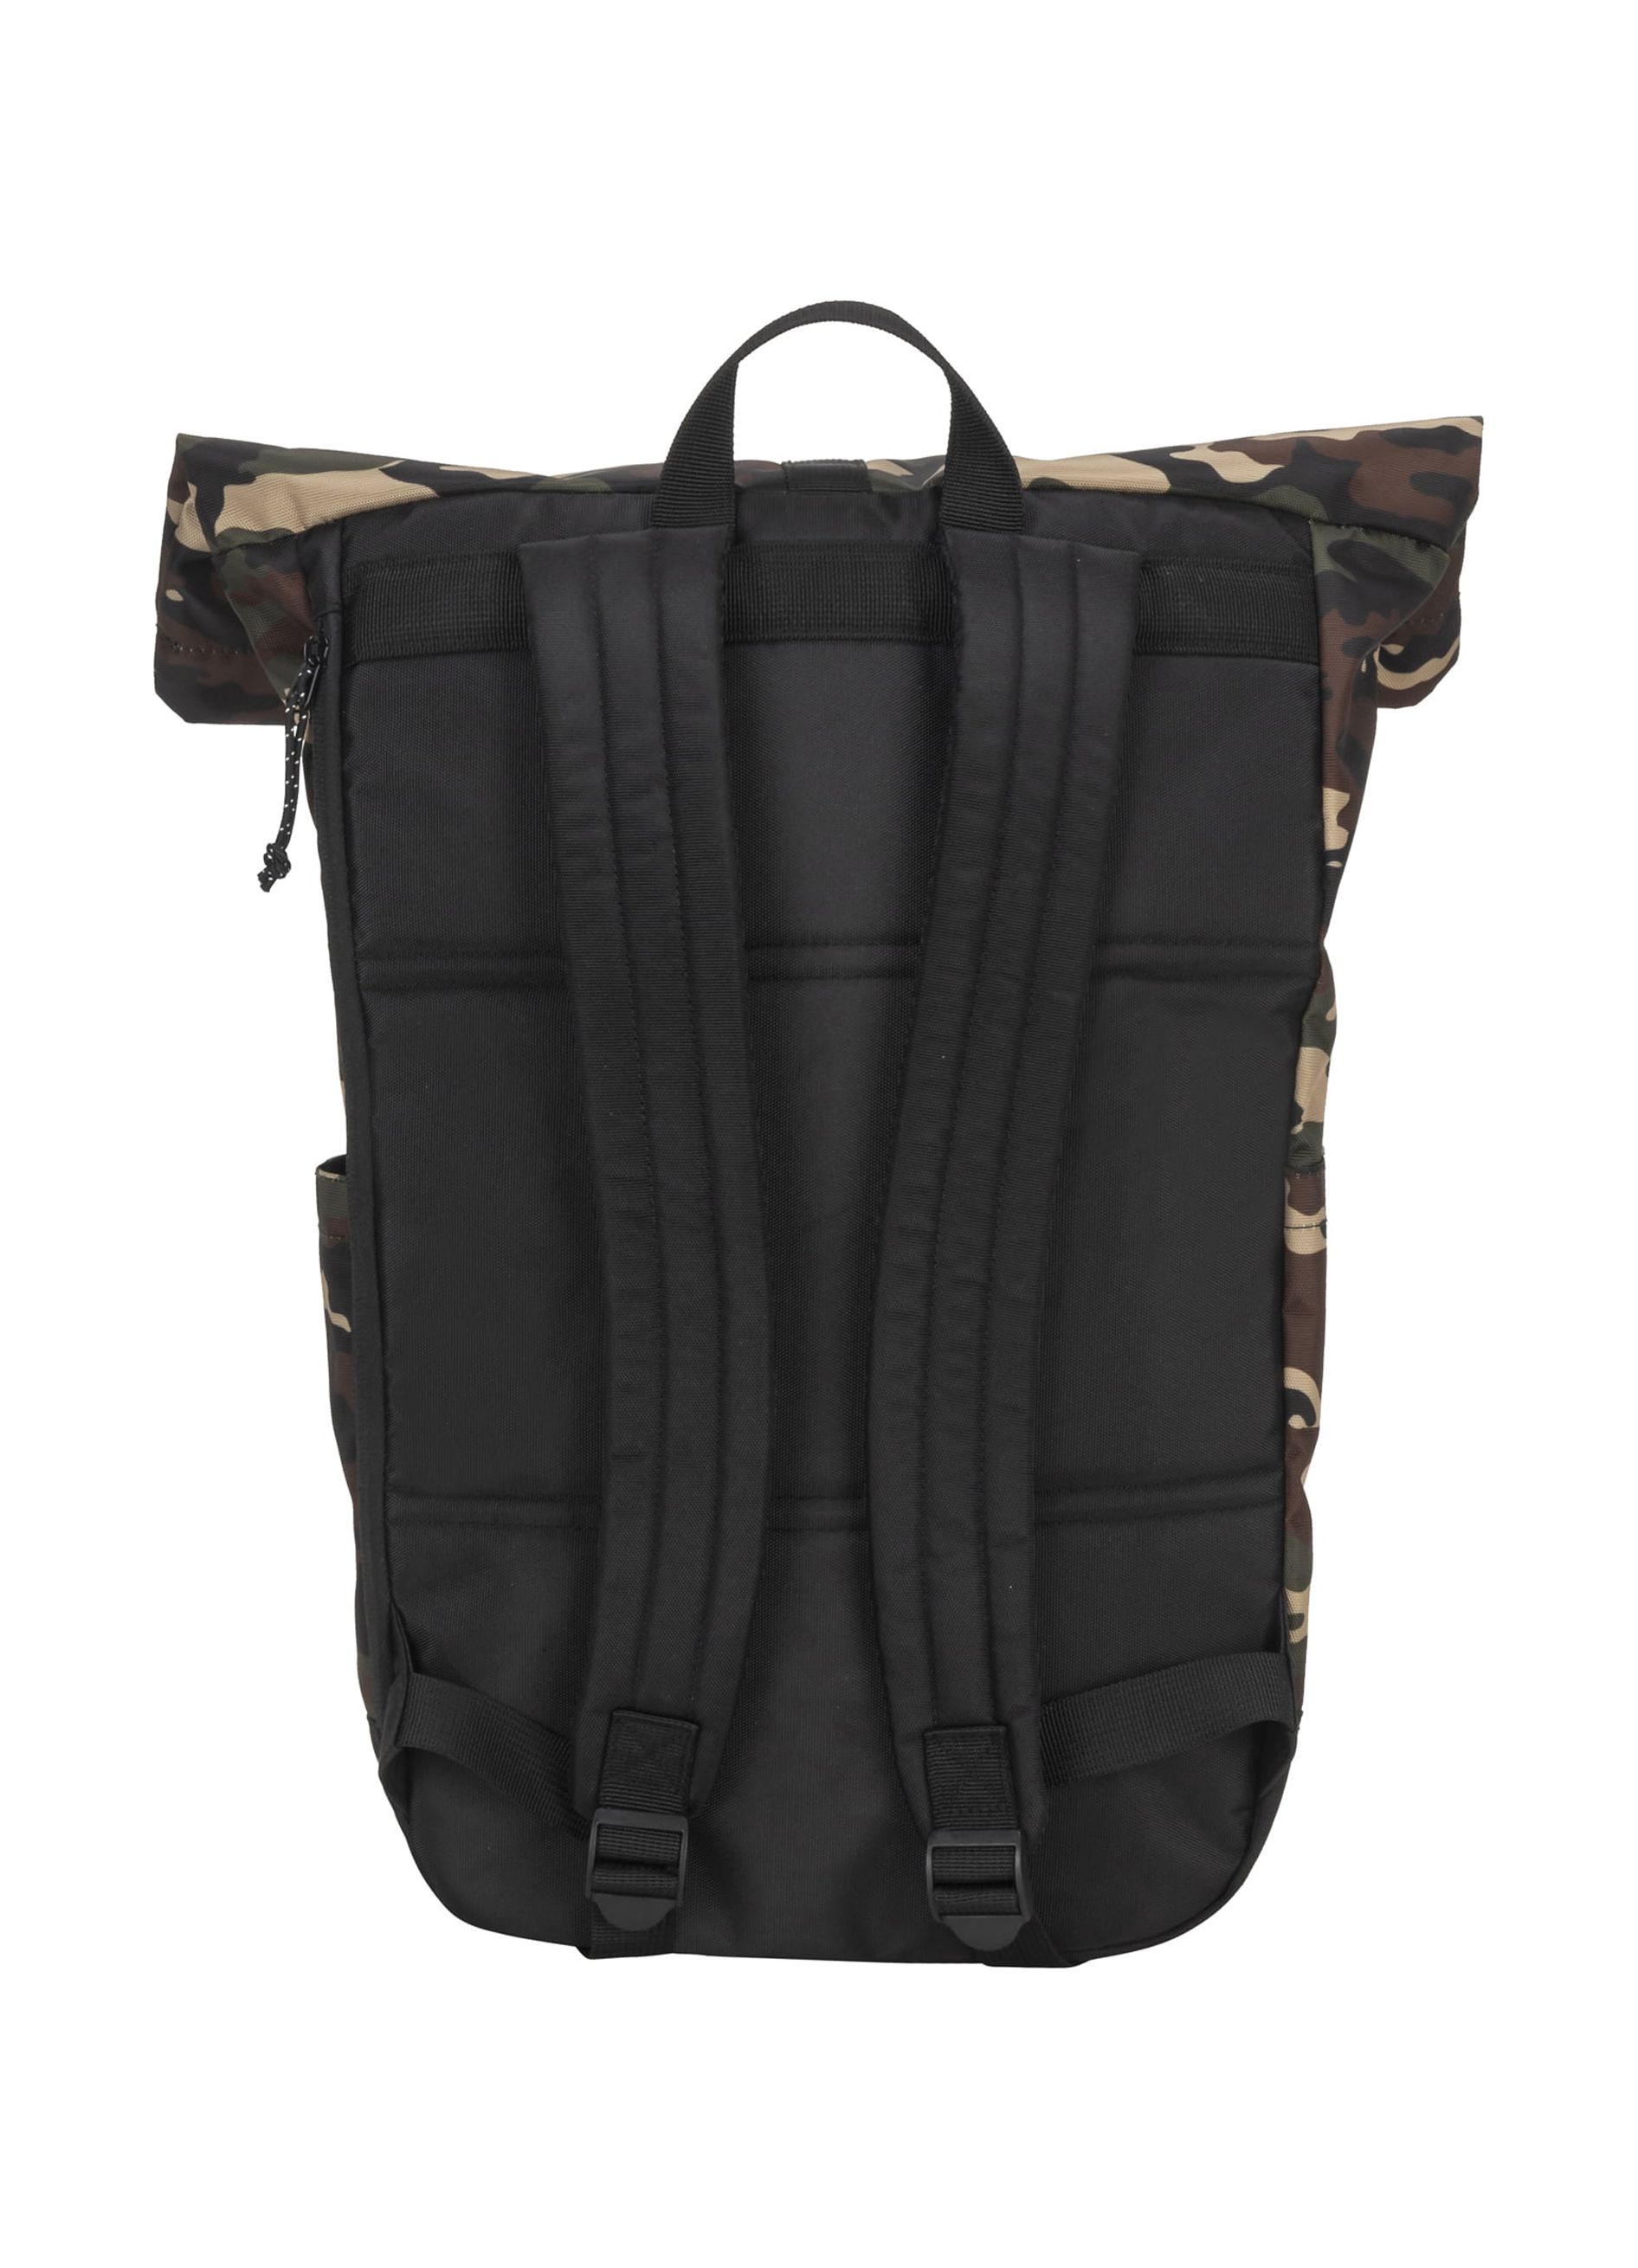 Avalanche Outdoors Eco Friendly Recycled 900D Polyester 20L Roll Top Backpack - image 3 of 4